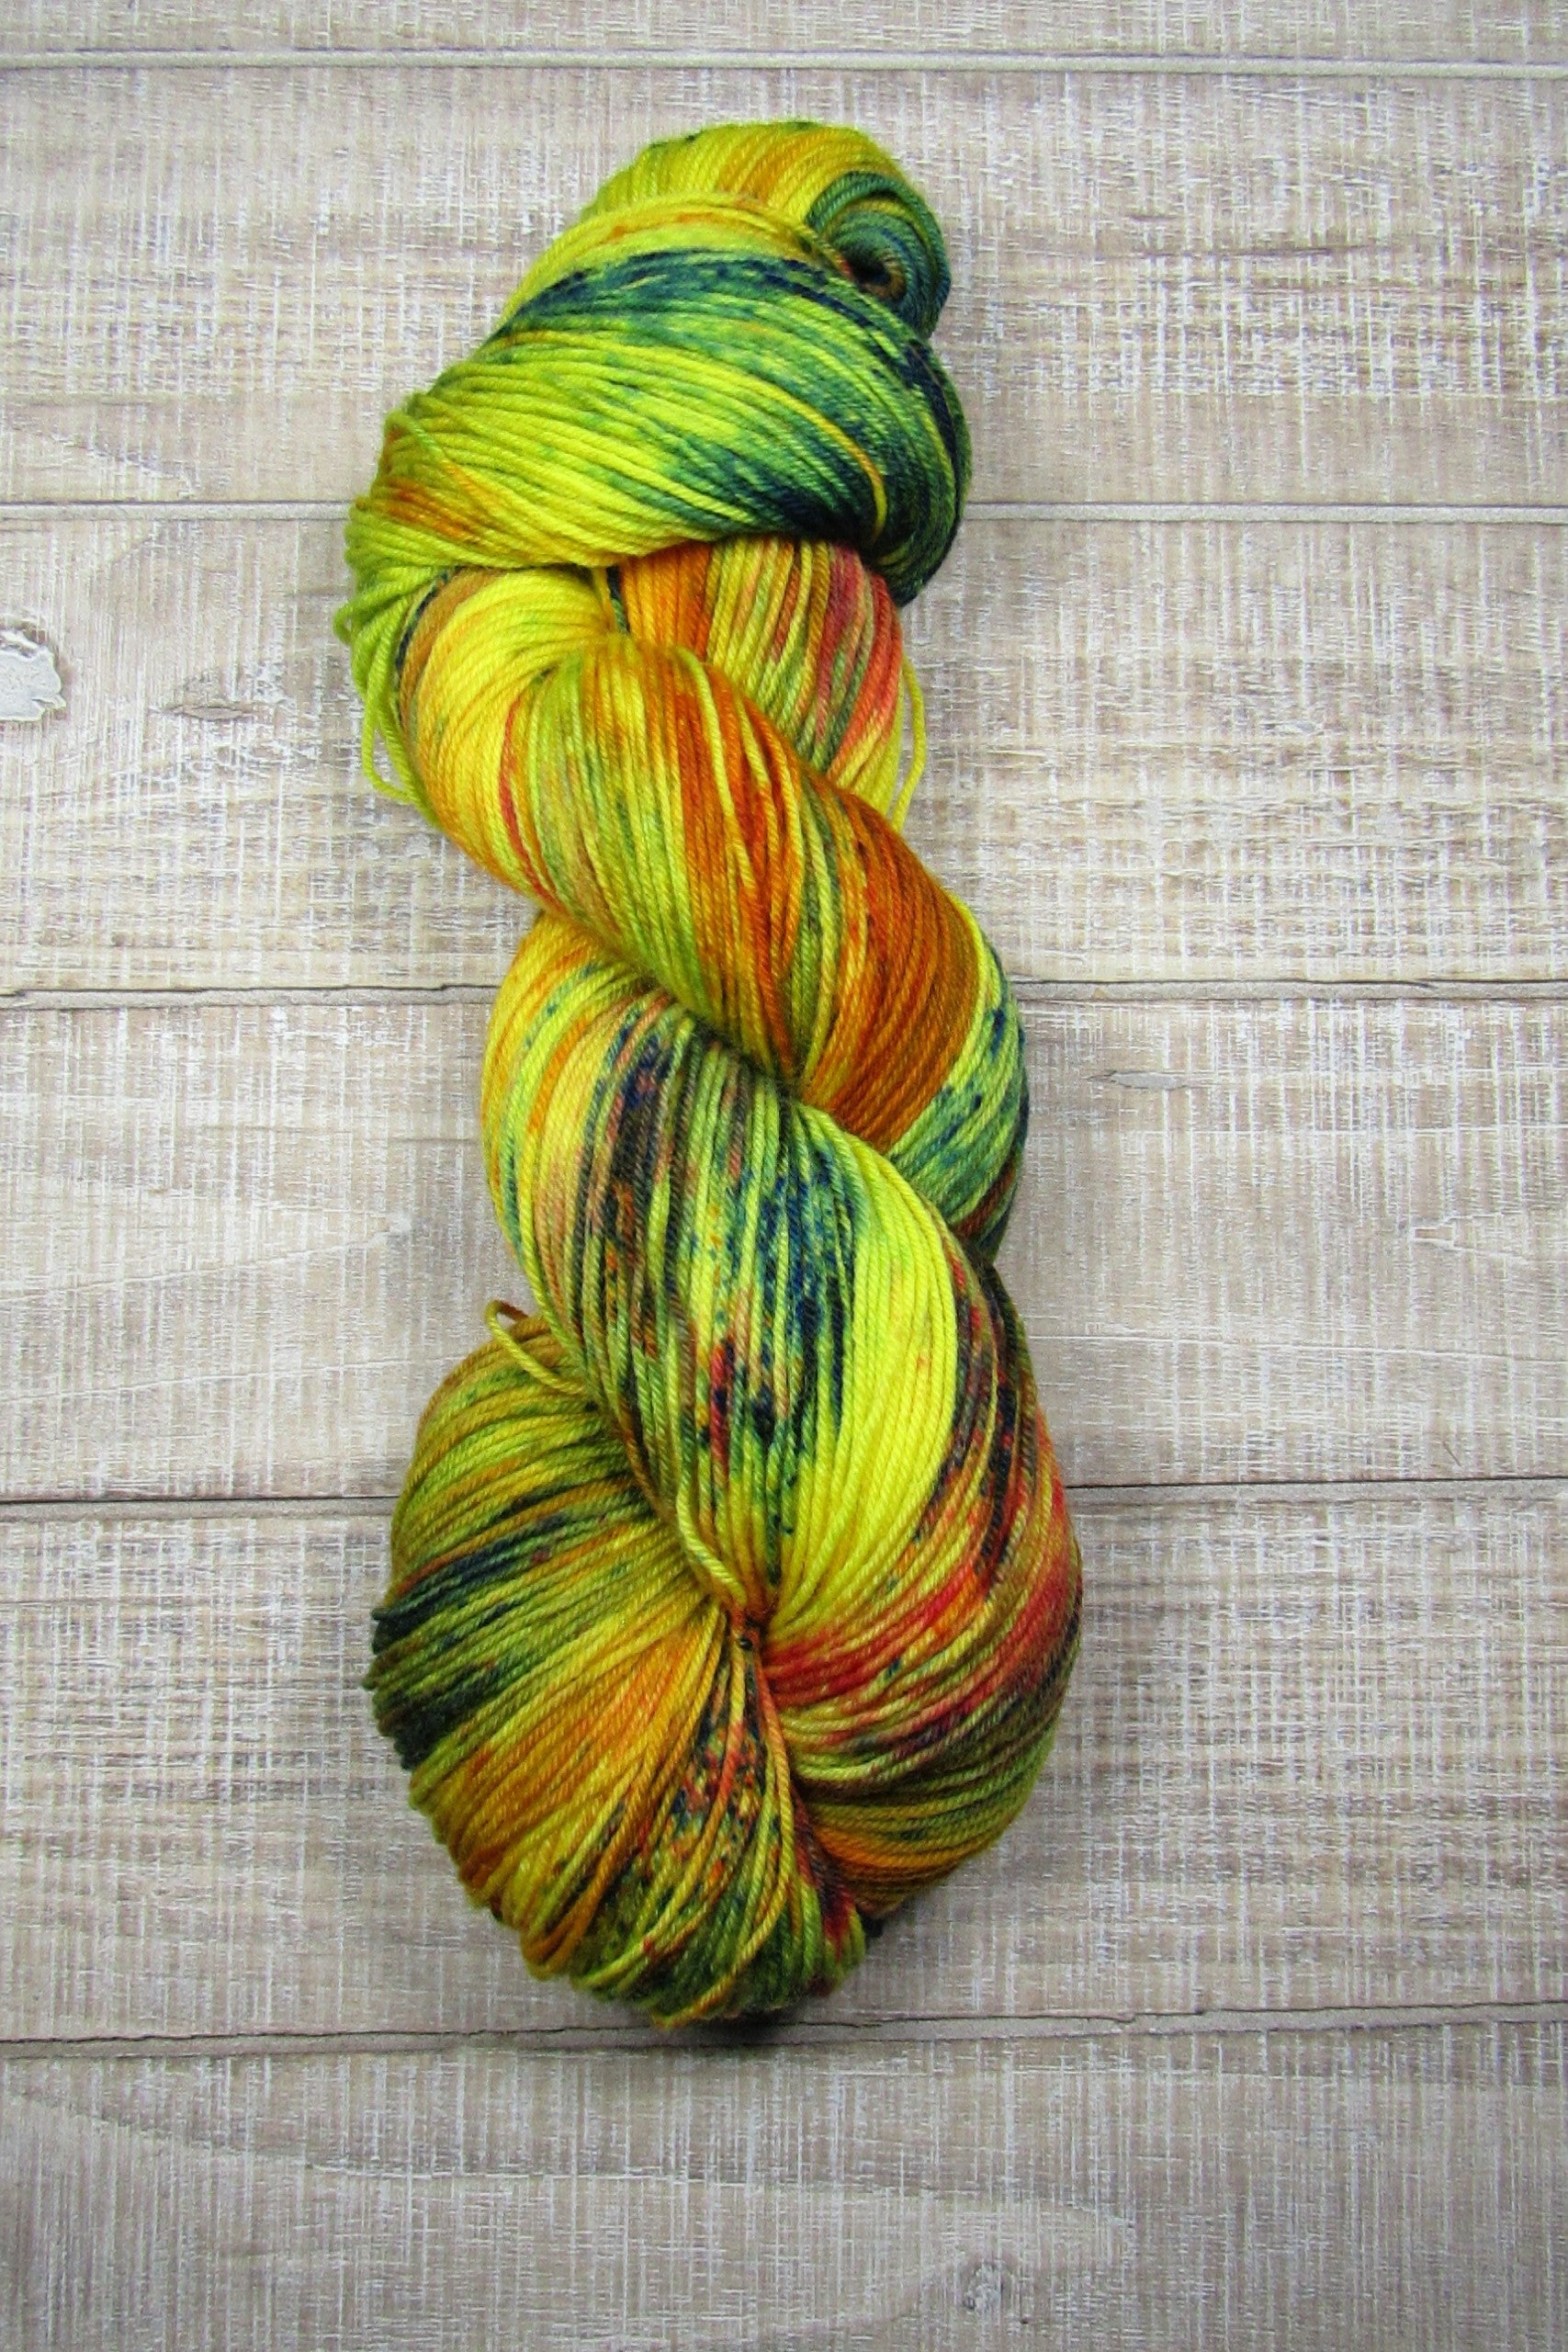 Hand-Dyed Yarn Sunny Superwash Merino/Nylon is a color of golden yellow with areas of orange, red, green, blue, and brown.